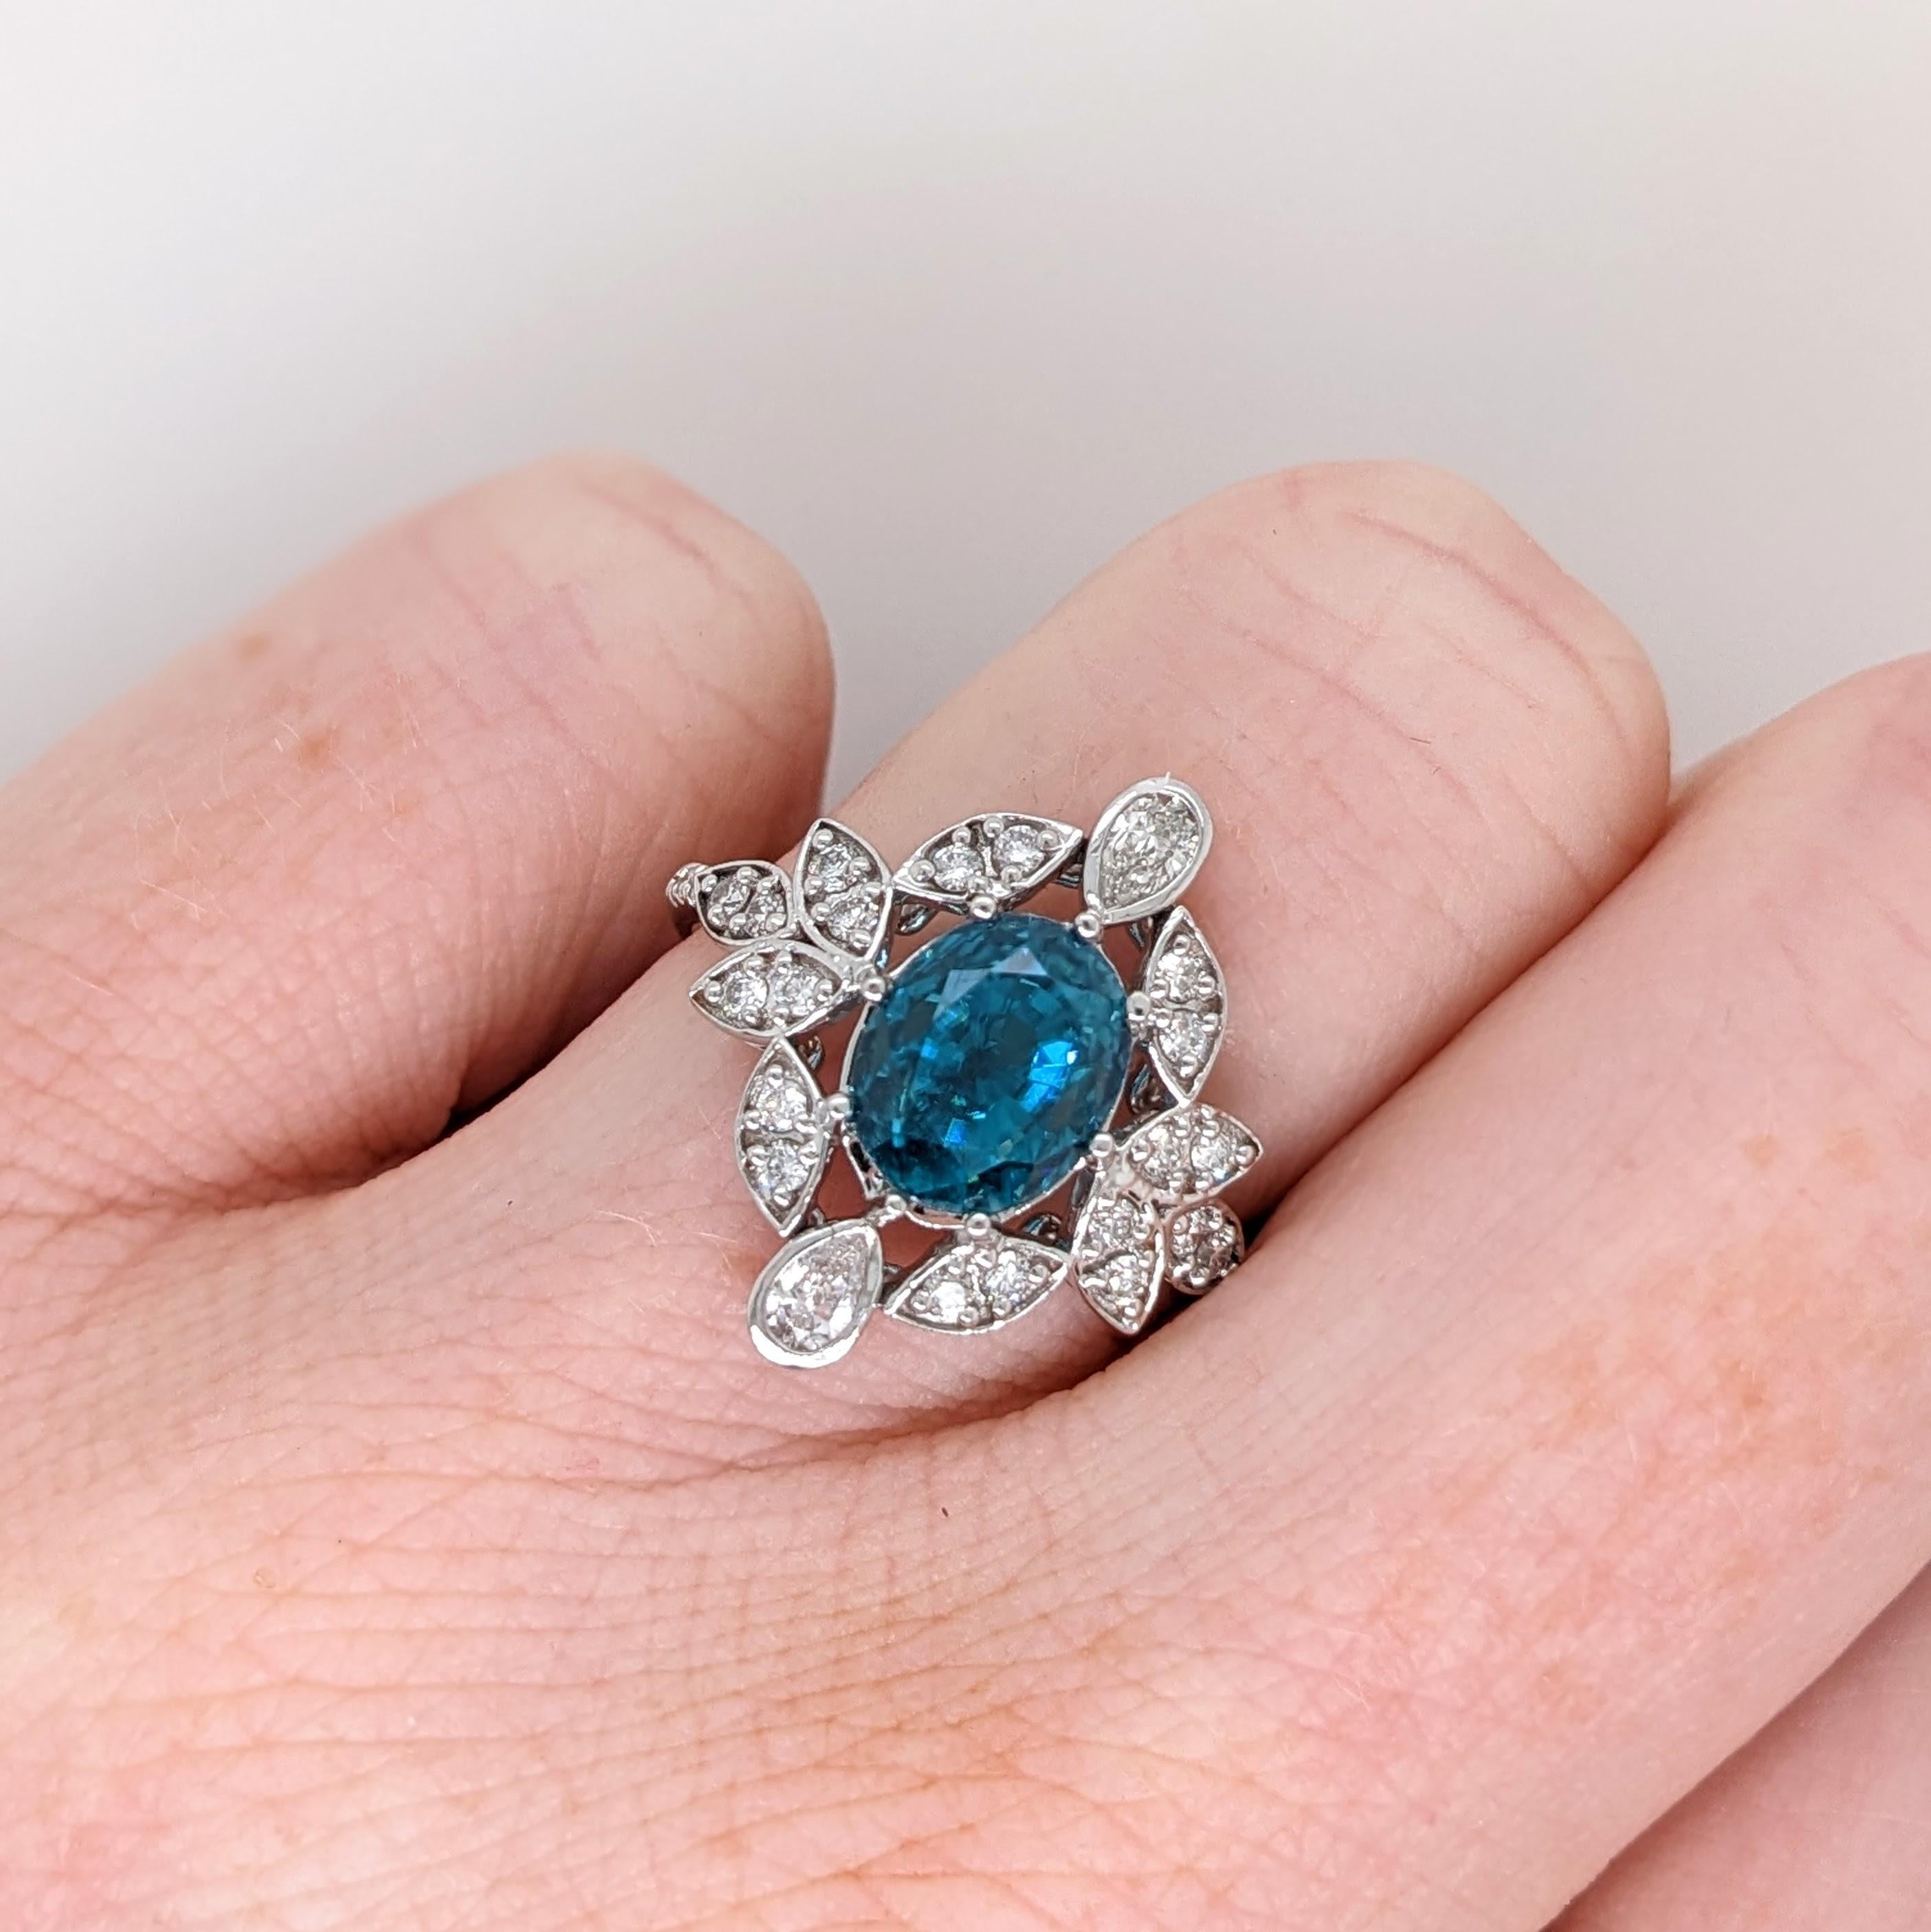 This embellished ring features a stunning vibrant 4.3ct oval blue zircon in a 14K white gold setting. This ring makes for a stunning accessory to any look! A fancy ring design perfect for an eye catching engagement or anniversary. This ring also